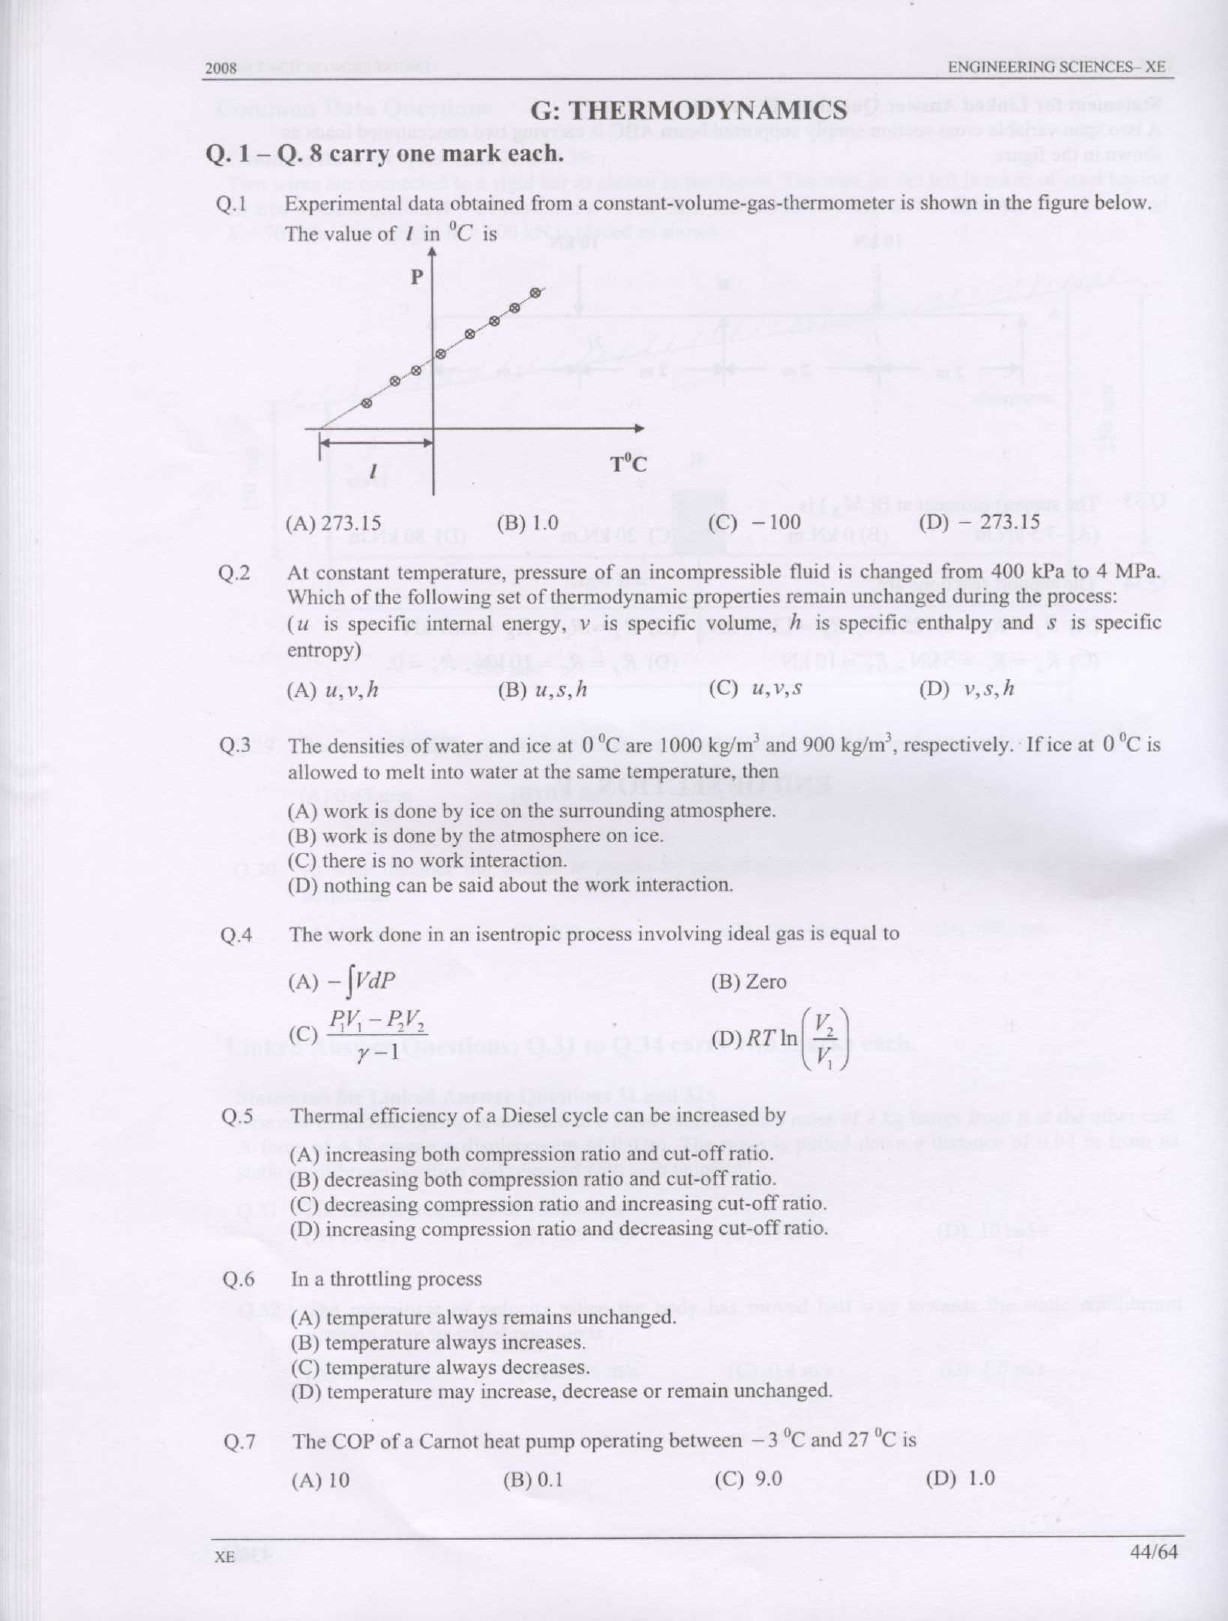 GATE Exam Question Paper 2008 Engineering Sciences 44